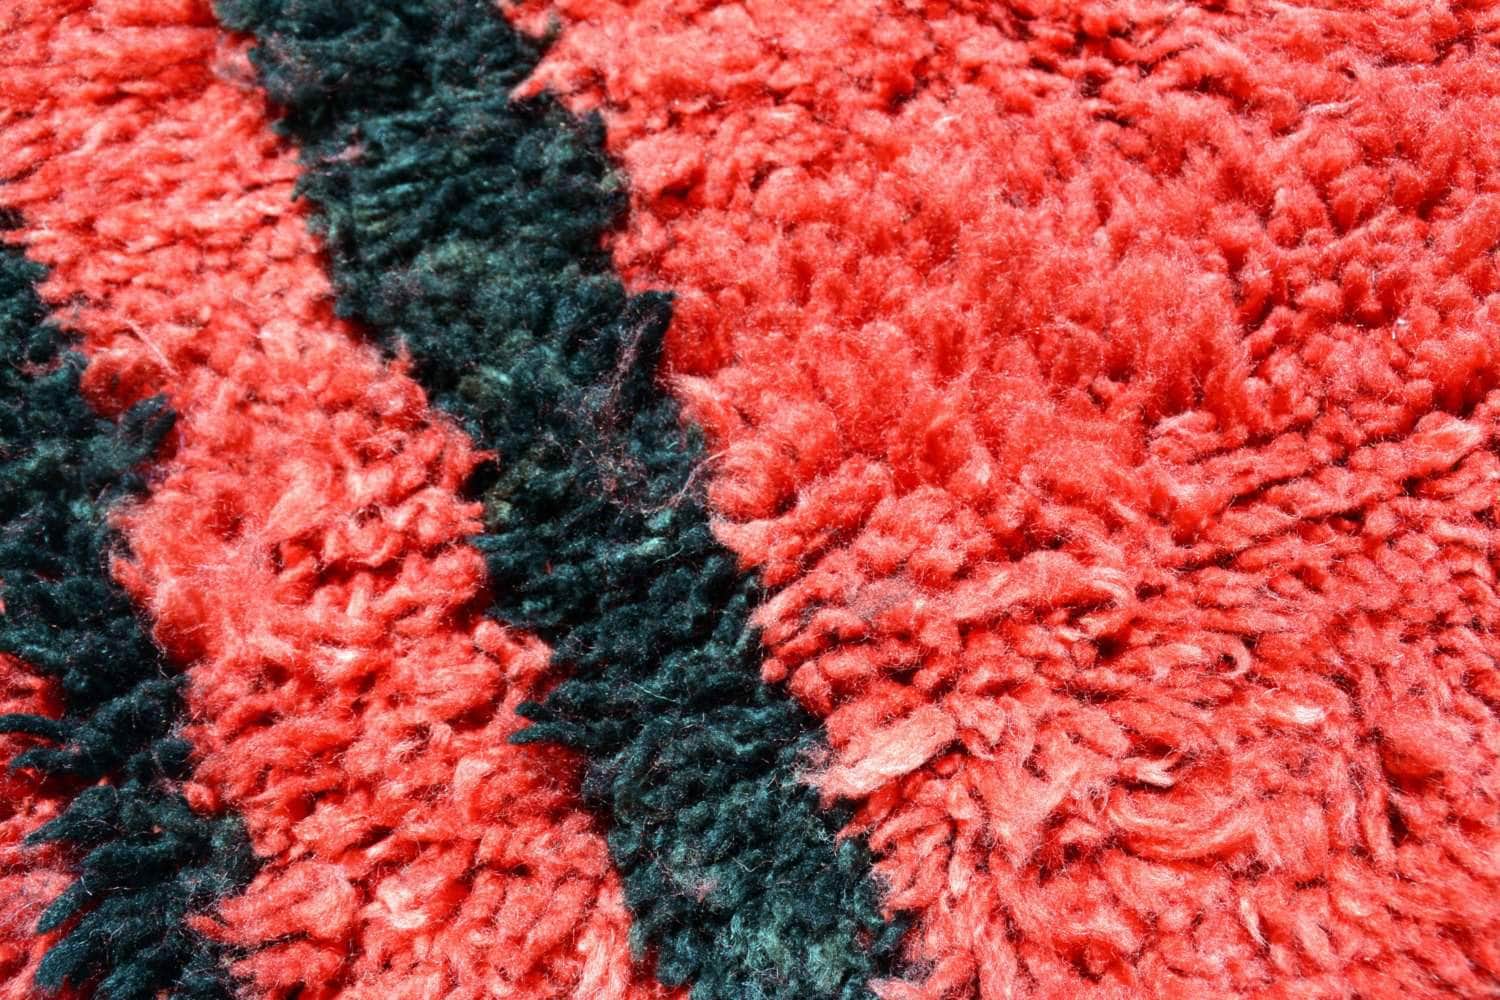   red and black rugs